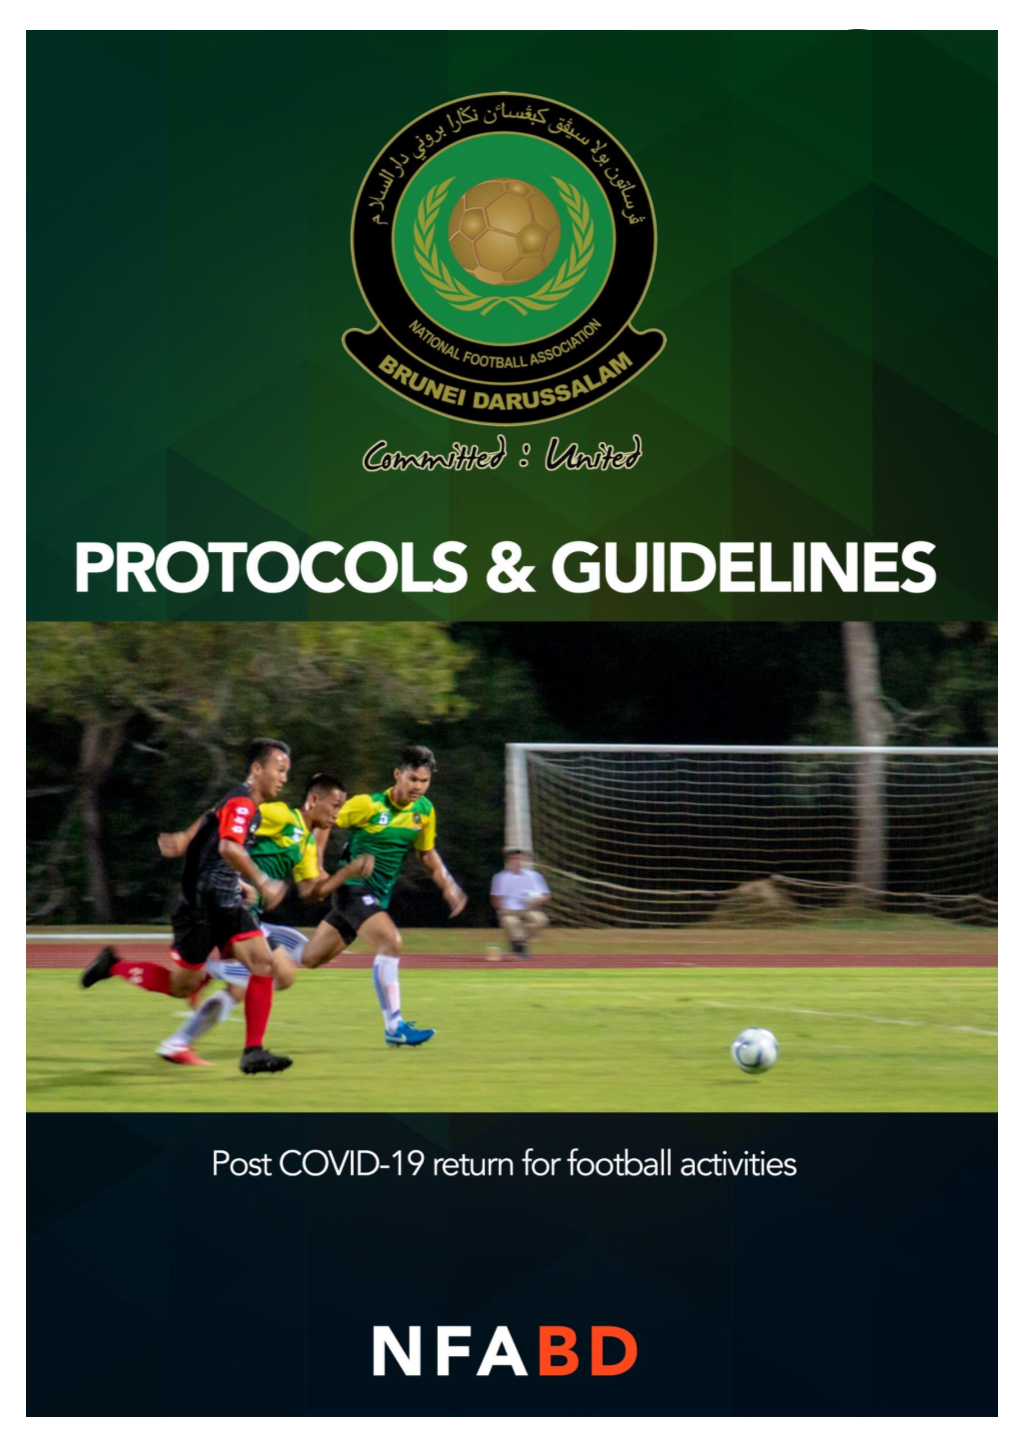 NFABD Post Covid-19 Return to Football Activities Protocol & Guidelines